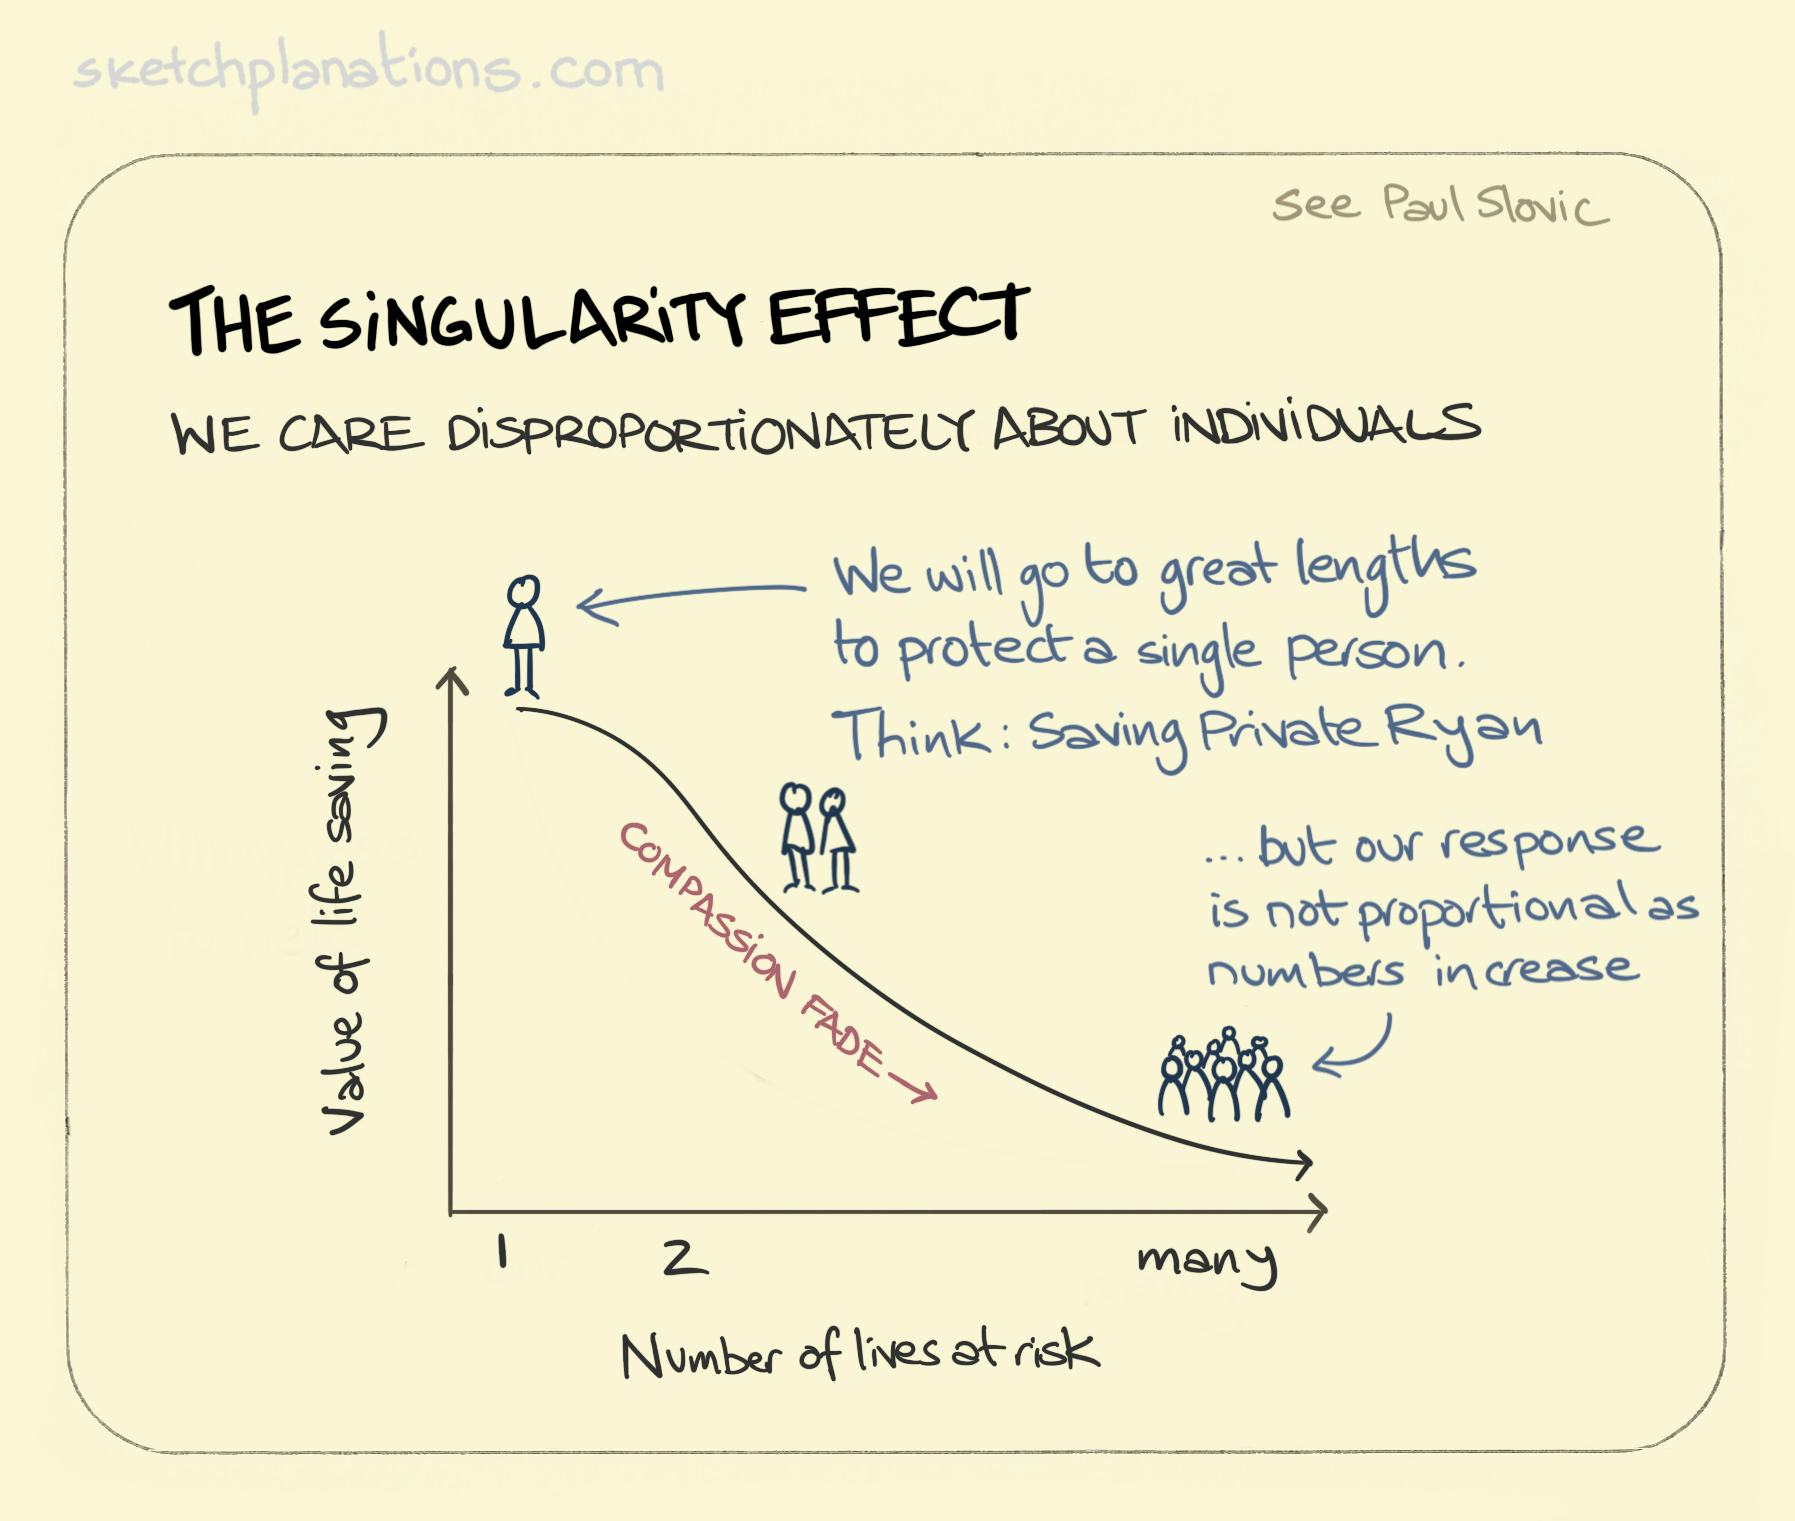 The singularity effect - Sketchplanations